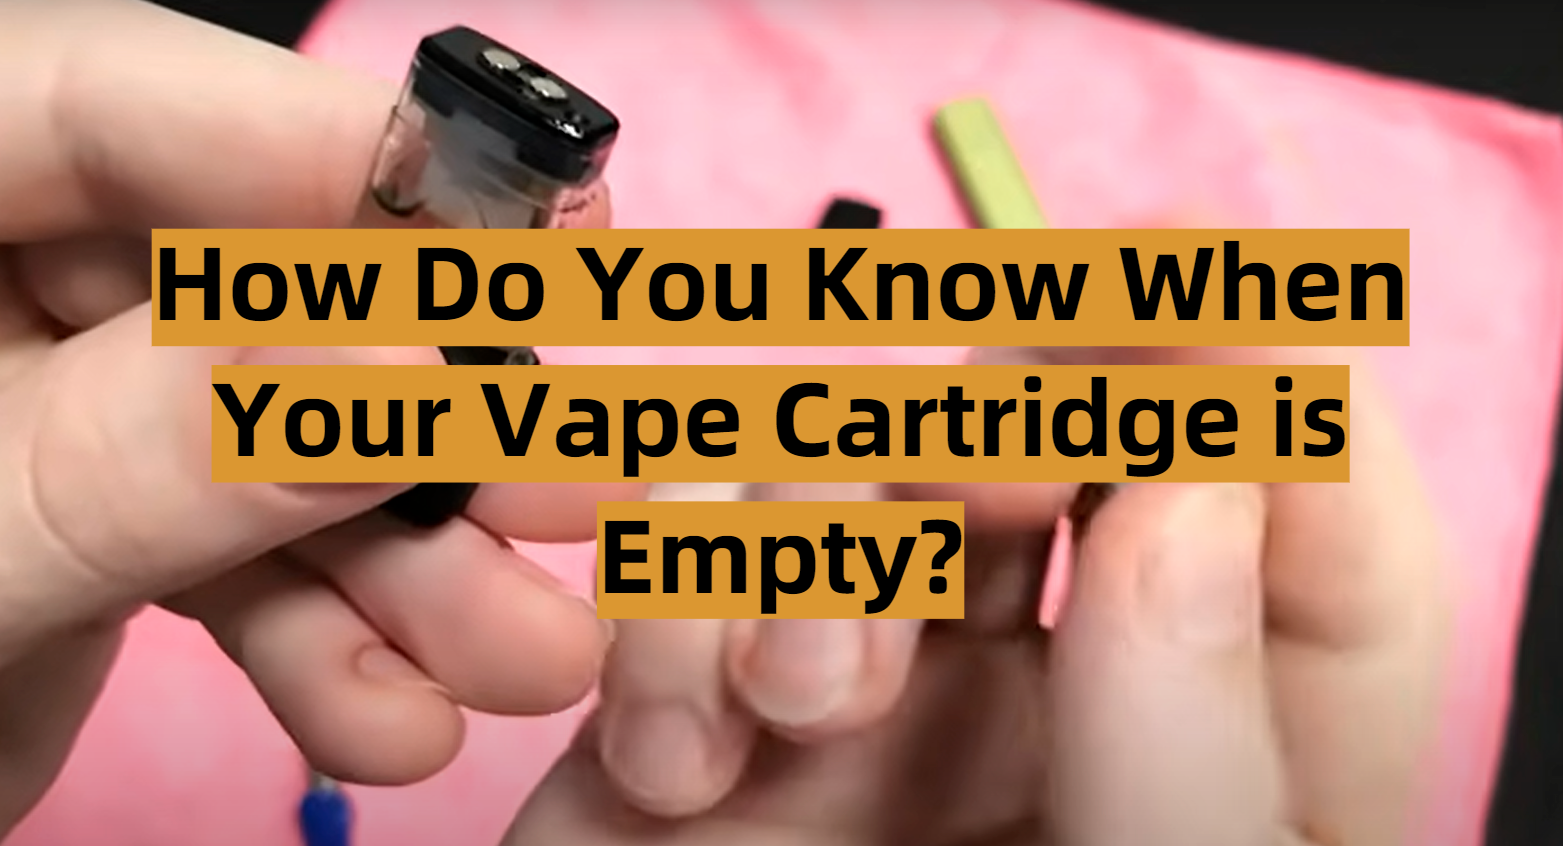 How Do You Know When Your Vape Cartridge is Empty?